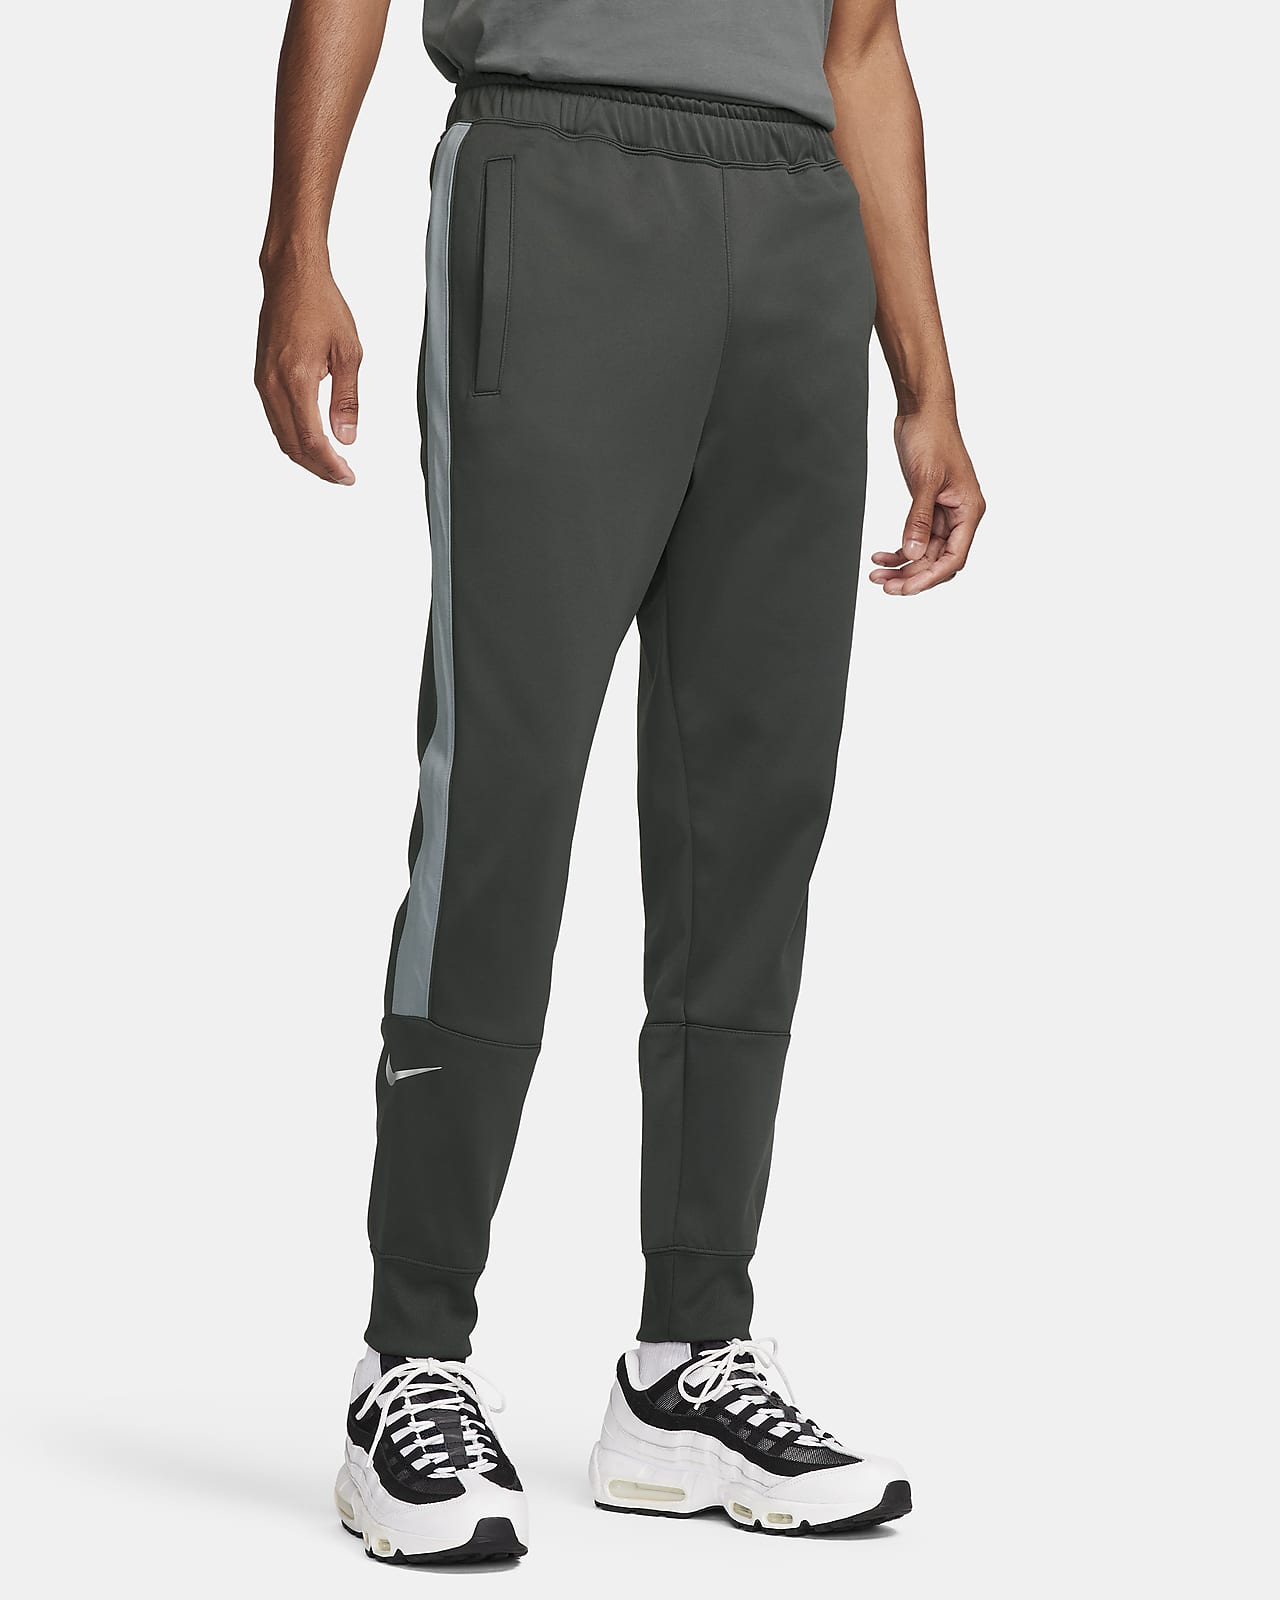 https://static.nike.com/a/images/t_PDP_1280_v1/f_auto,q_auto:eco/c50227fb-5c7a-465c-bf57-efd58a4cc210/pantalon-de-jogging-air-pour-N9NRkb.png